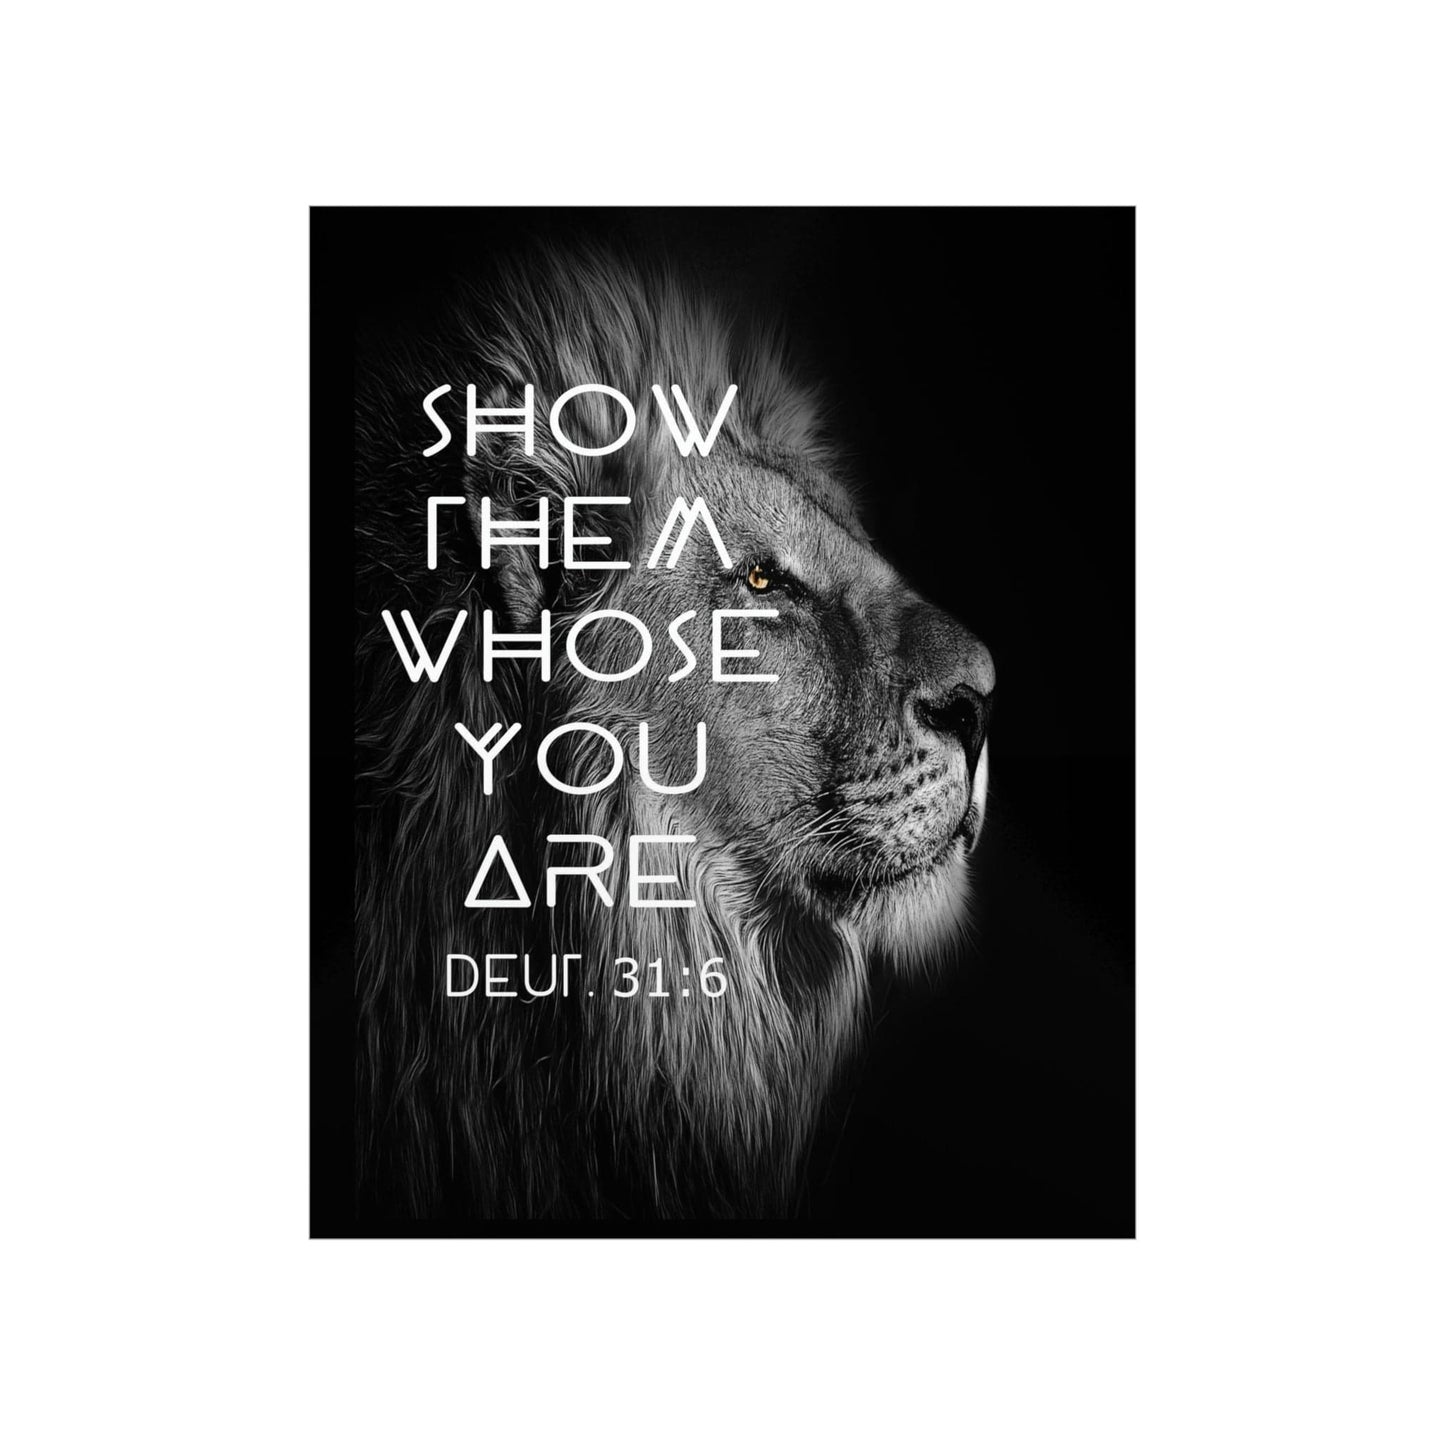 Printify Poster Show Them Whose You Are - Deut. 31:6 Christian Poster